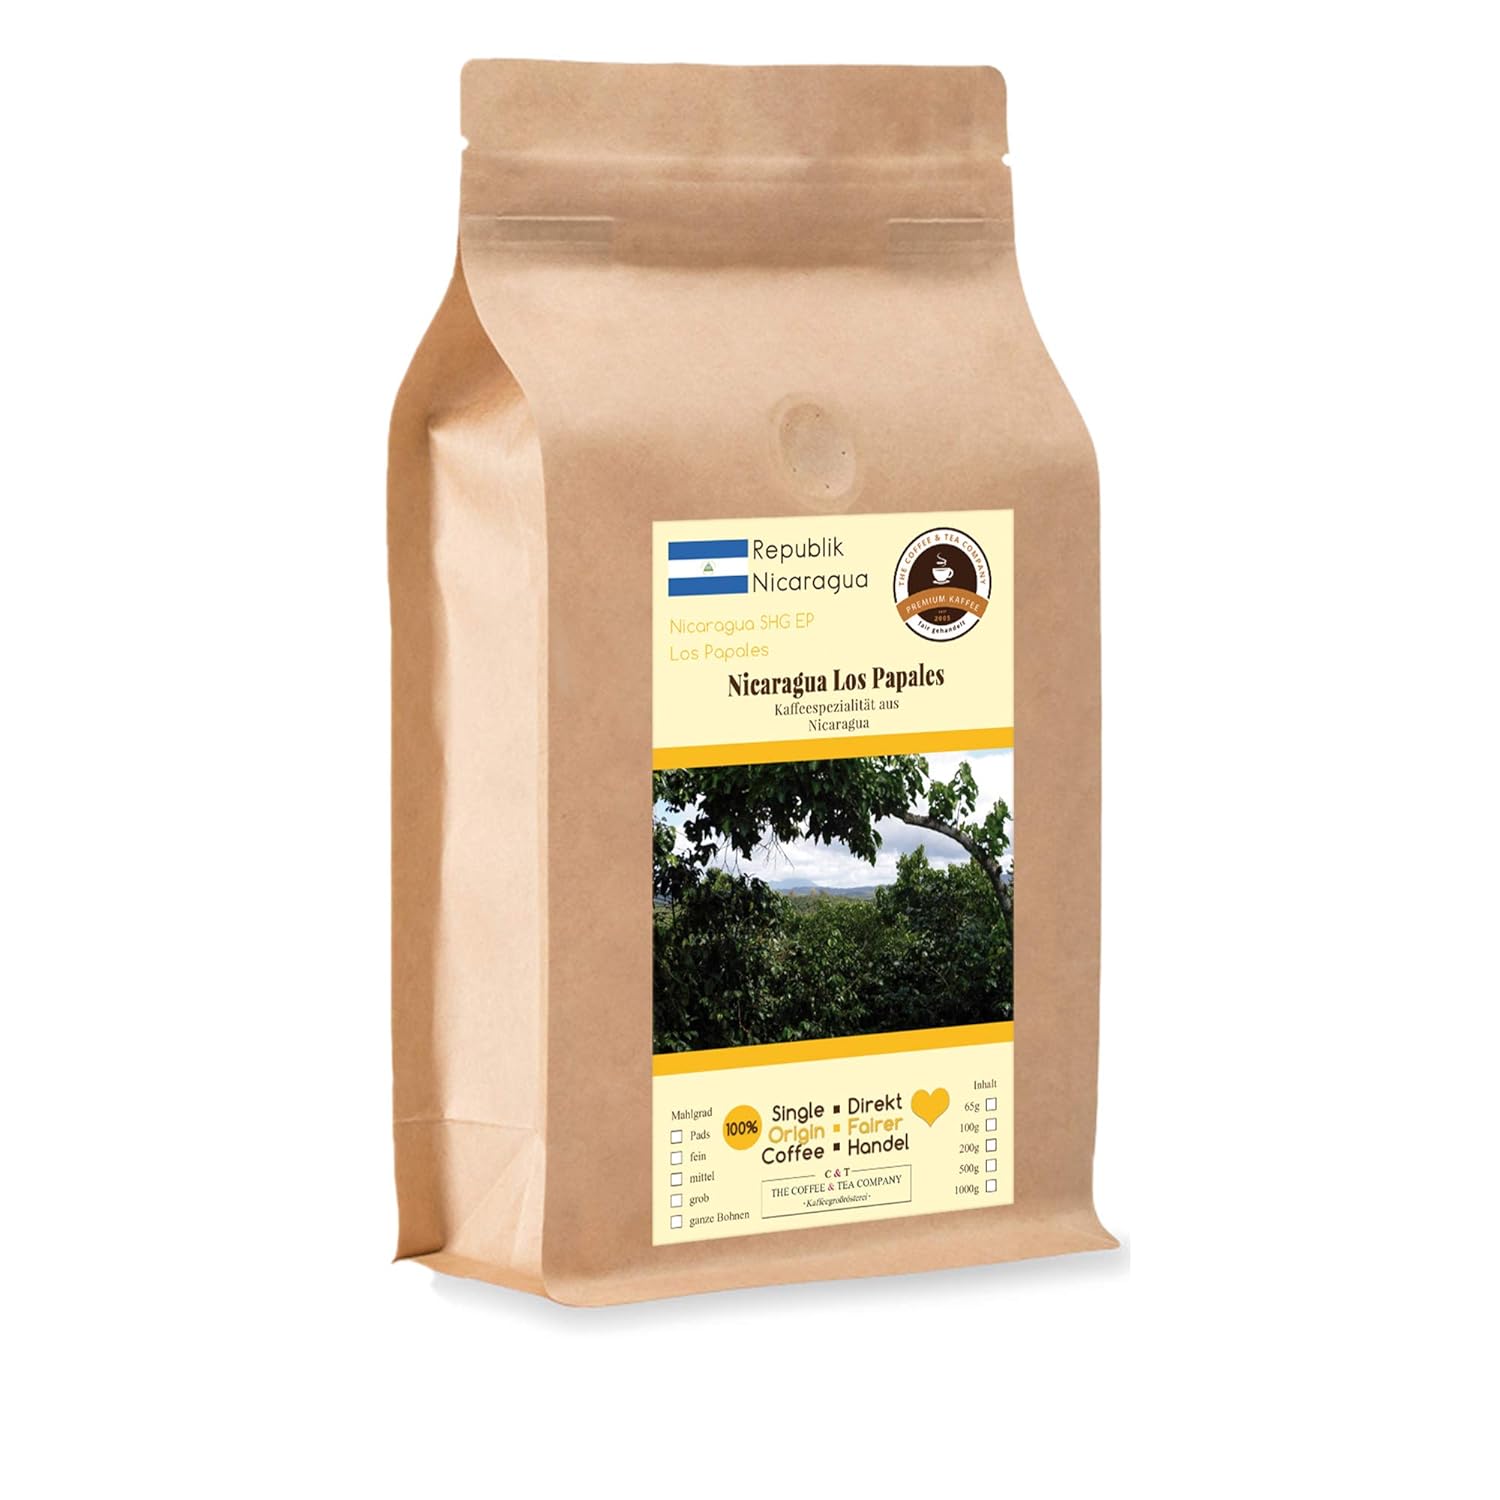 Coffee Globetrotter - Coffee with Heart - Nicaragua Los Papales - 500 g Coarse Ground - for Stamp Jug French Press Coffee Maker - Top Coffee Fair Trade Supports Social Projects